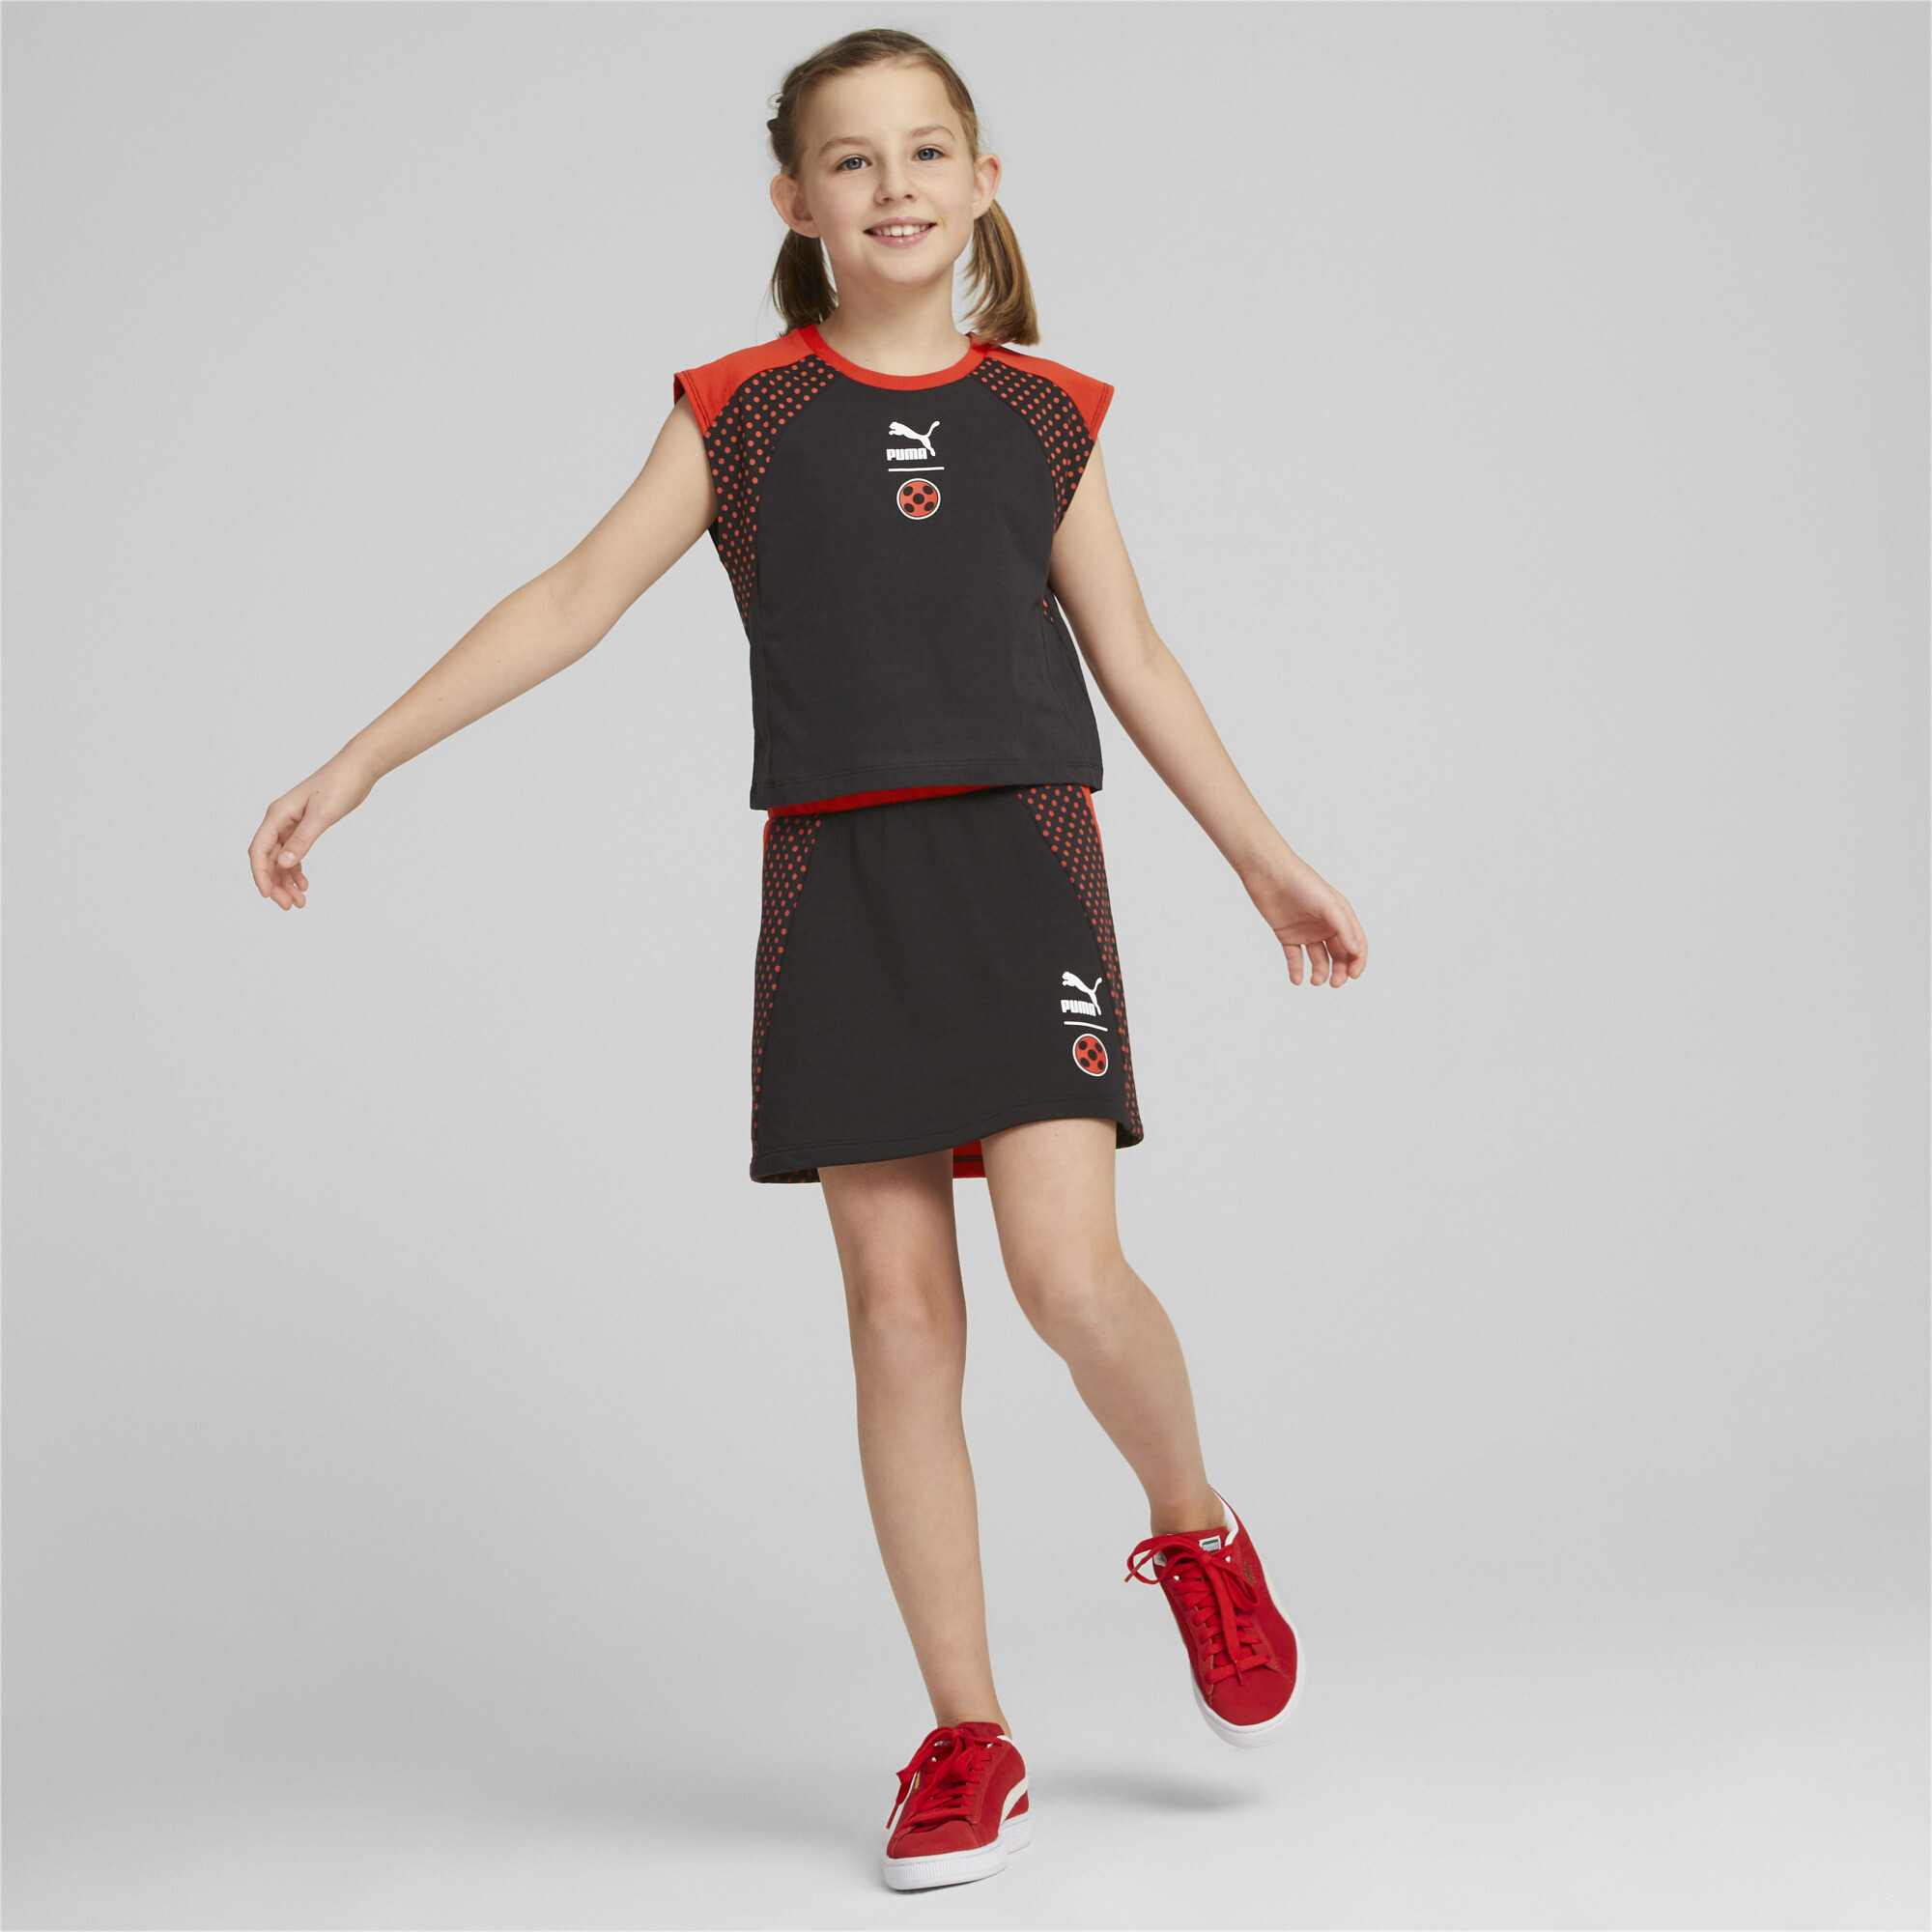 PUMA X MIRACULOUS Skirt In Black, Size 15-16 Youth